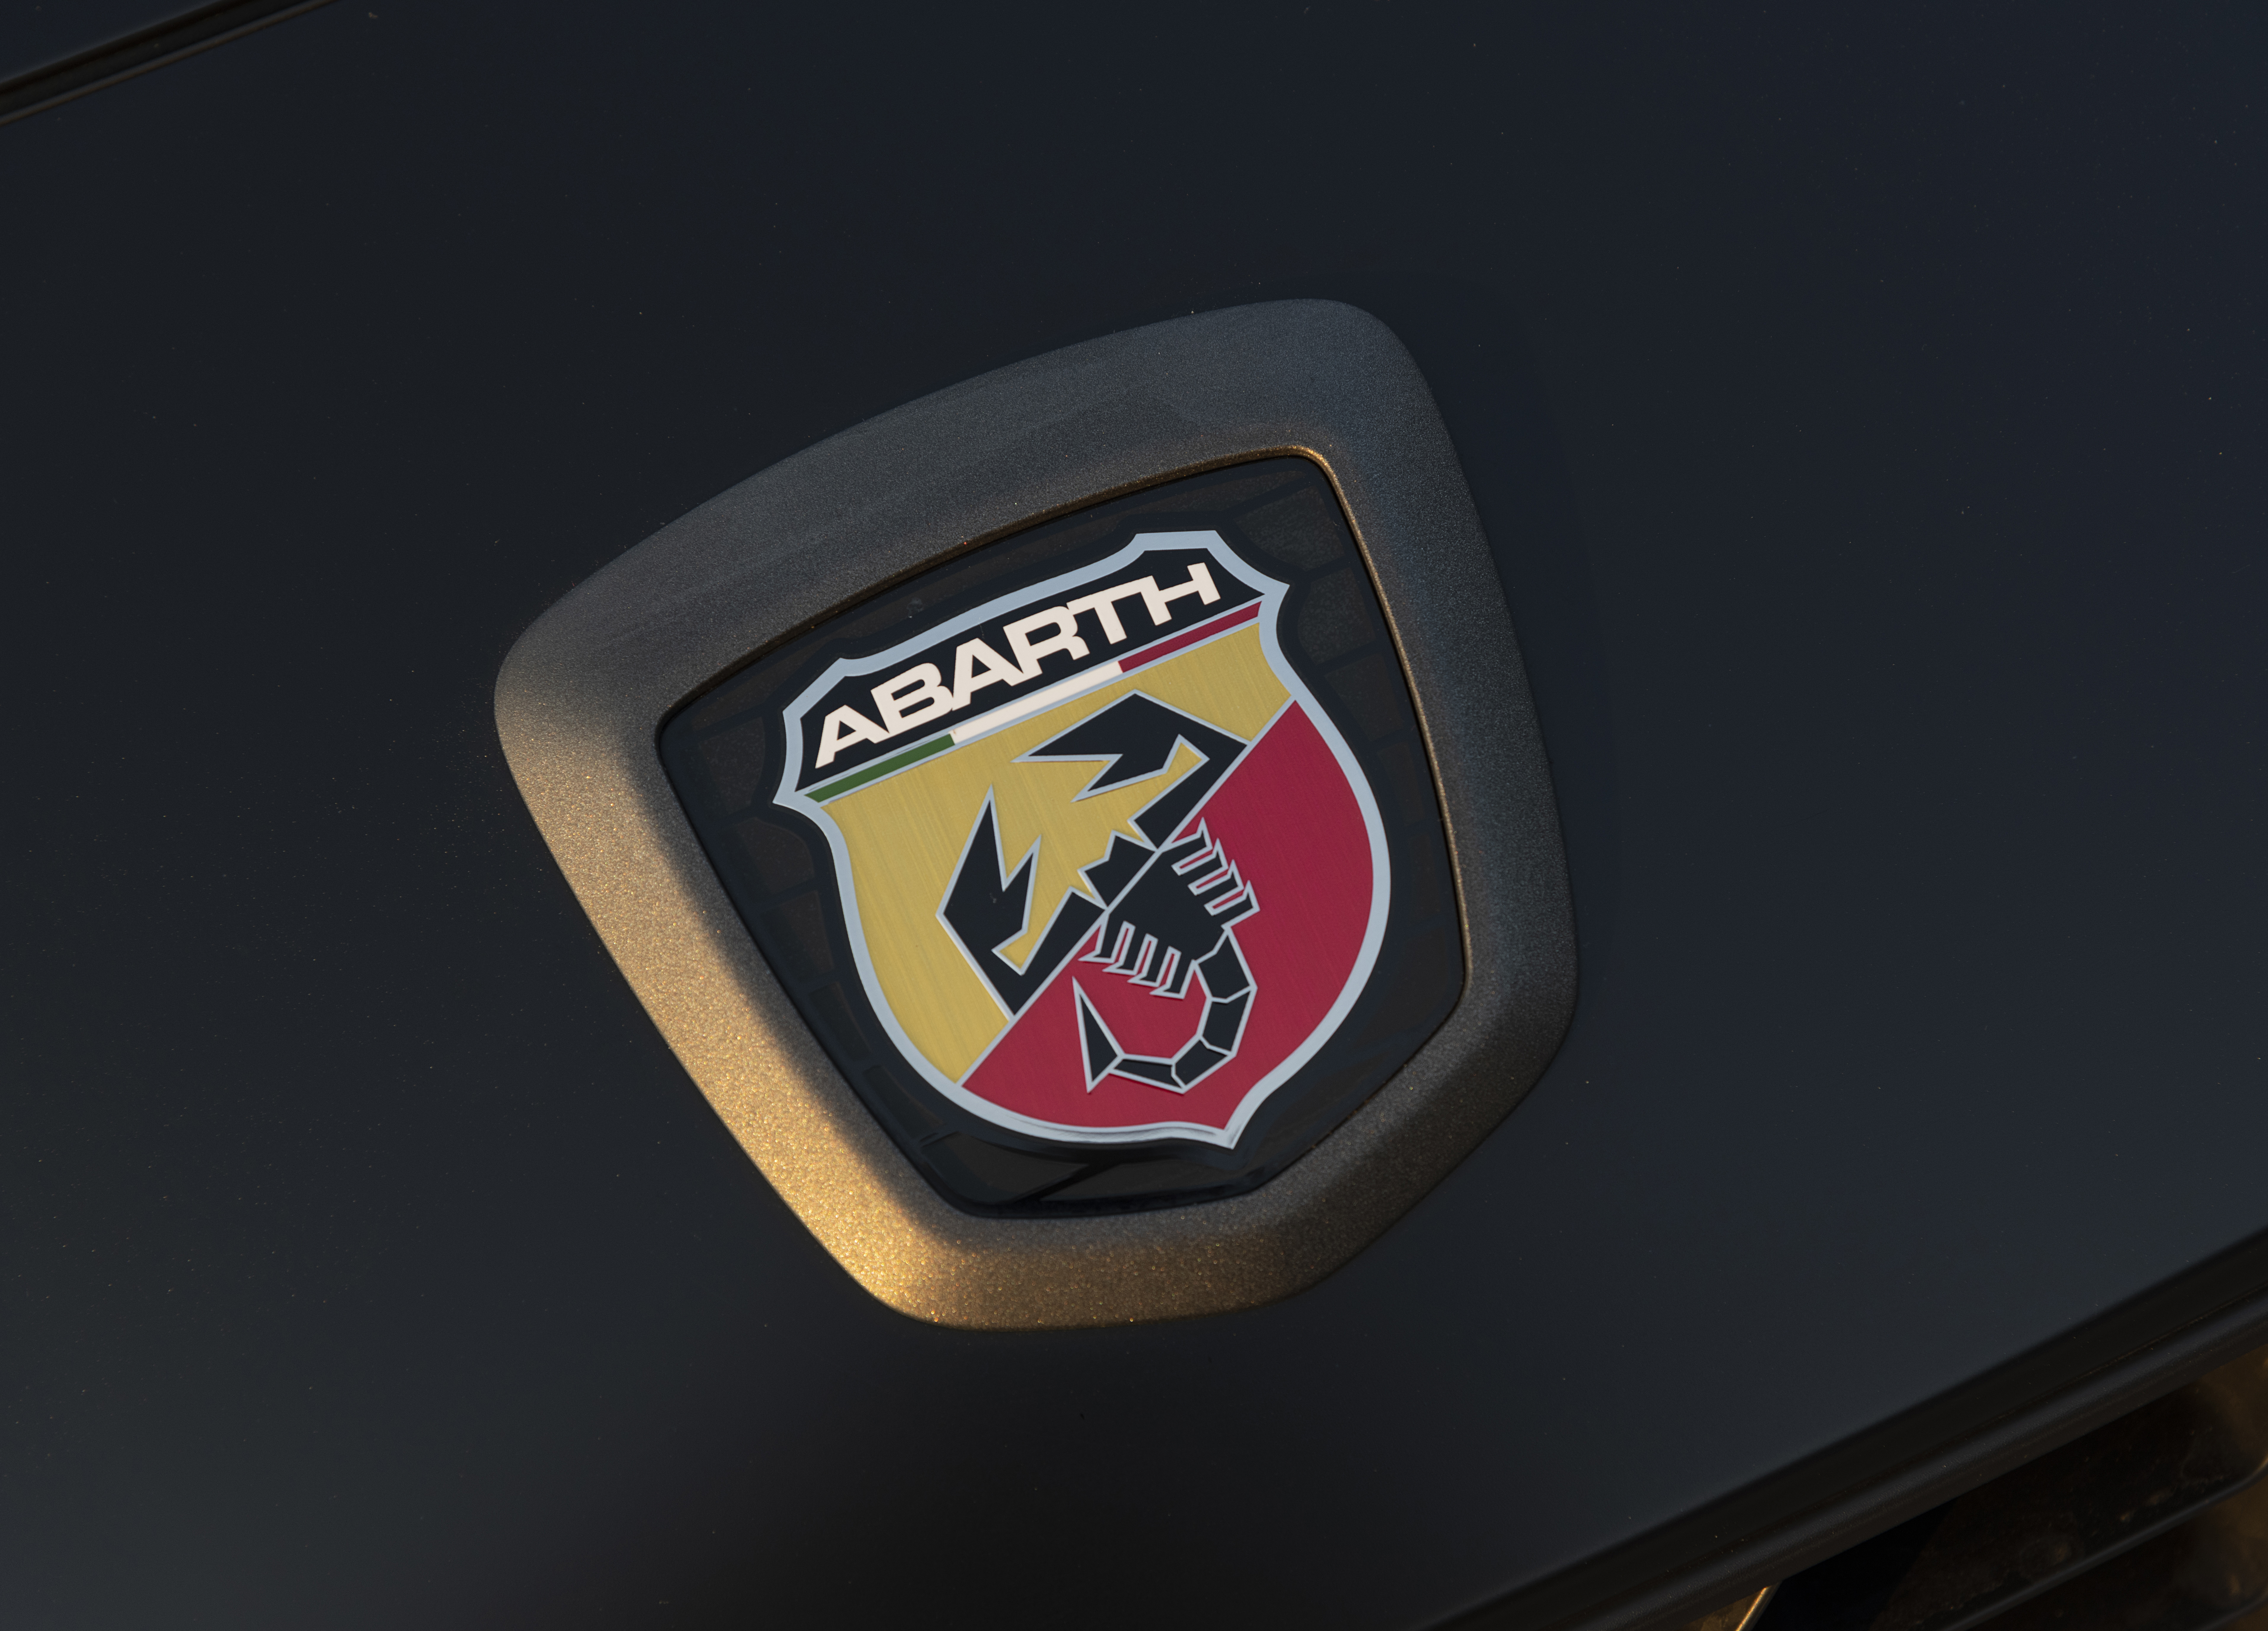 Abarth are celebrating their 75th anniversary with a sports coupe